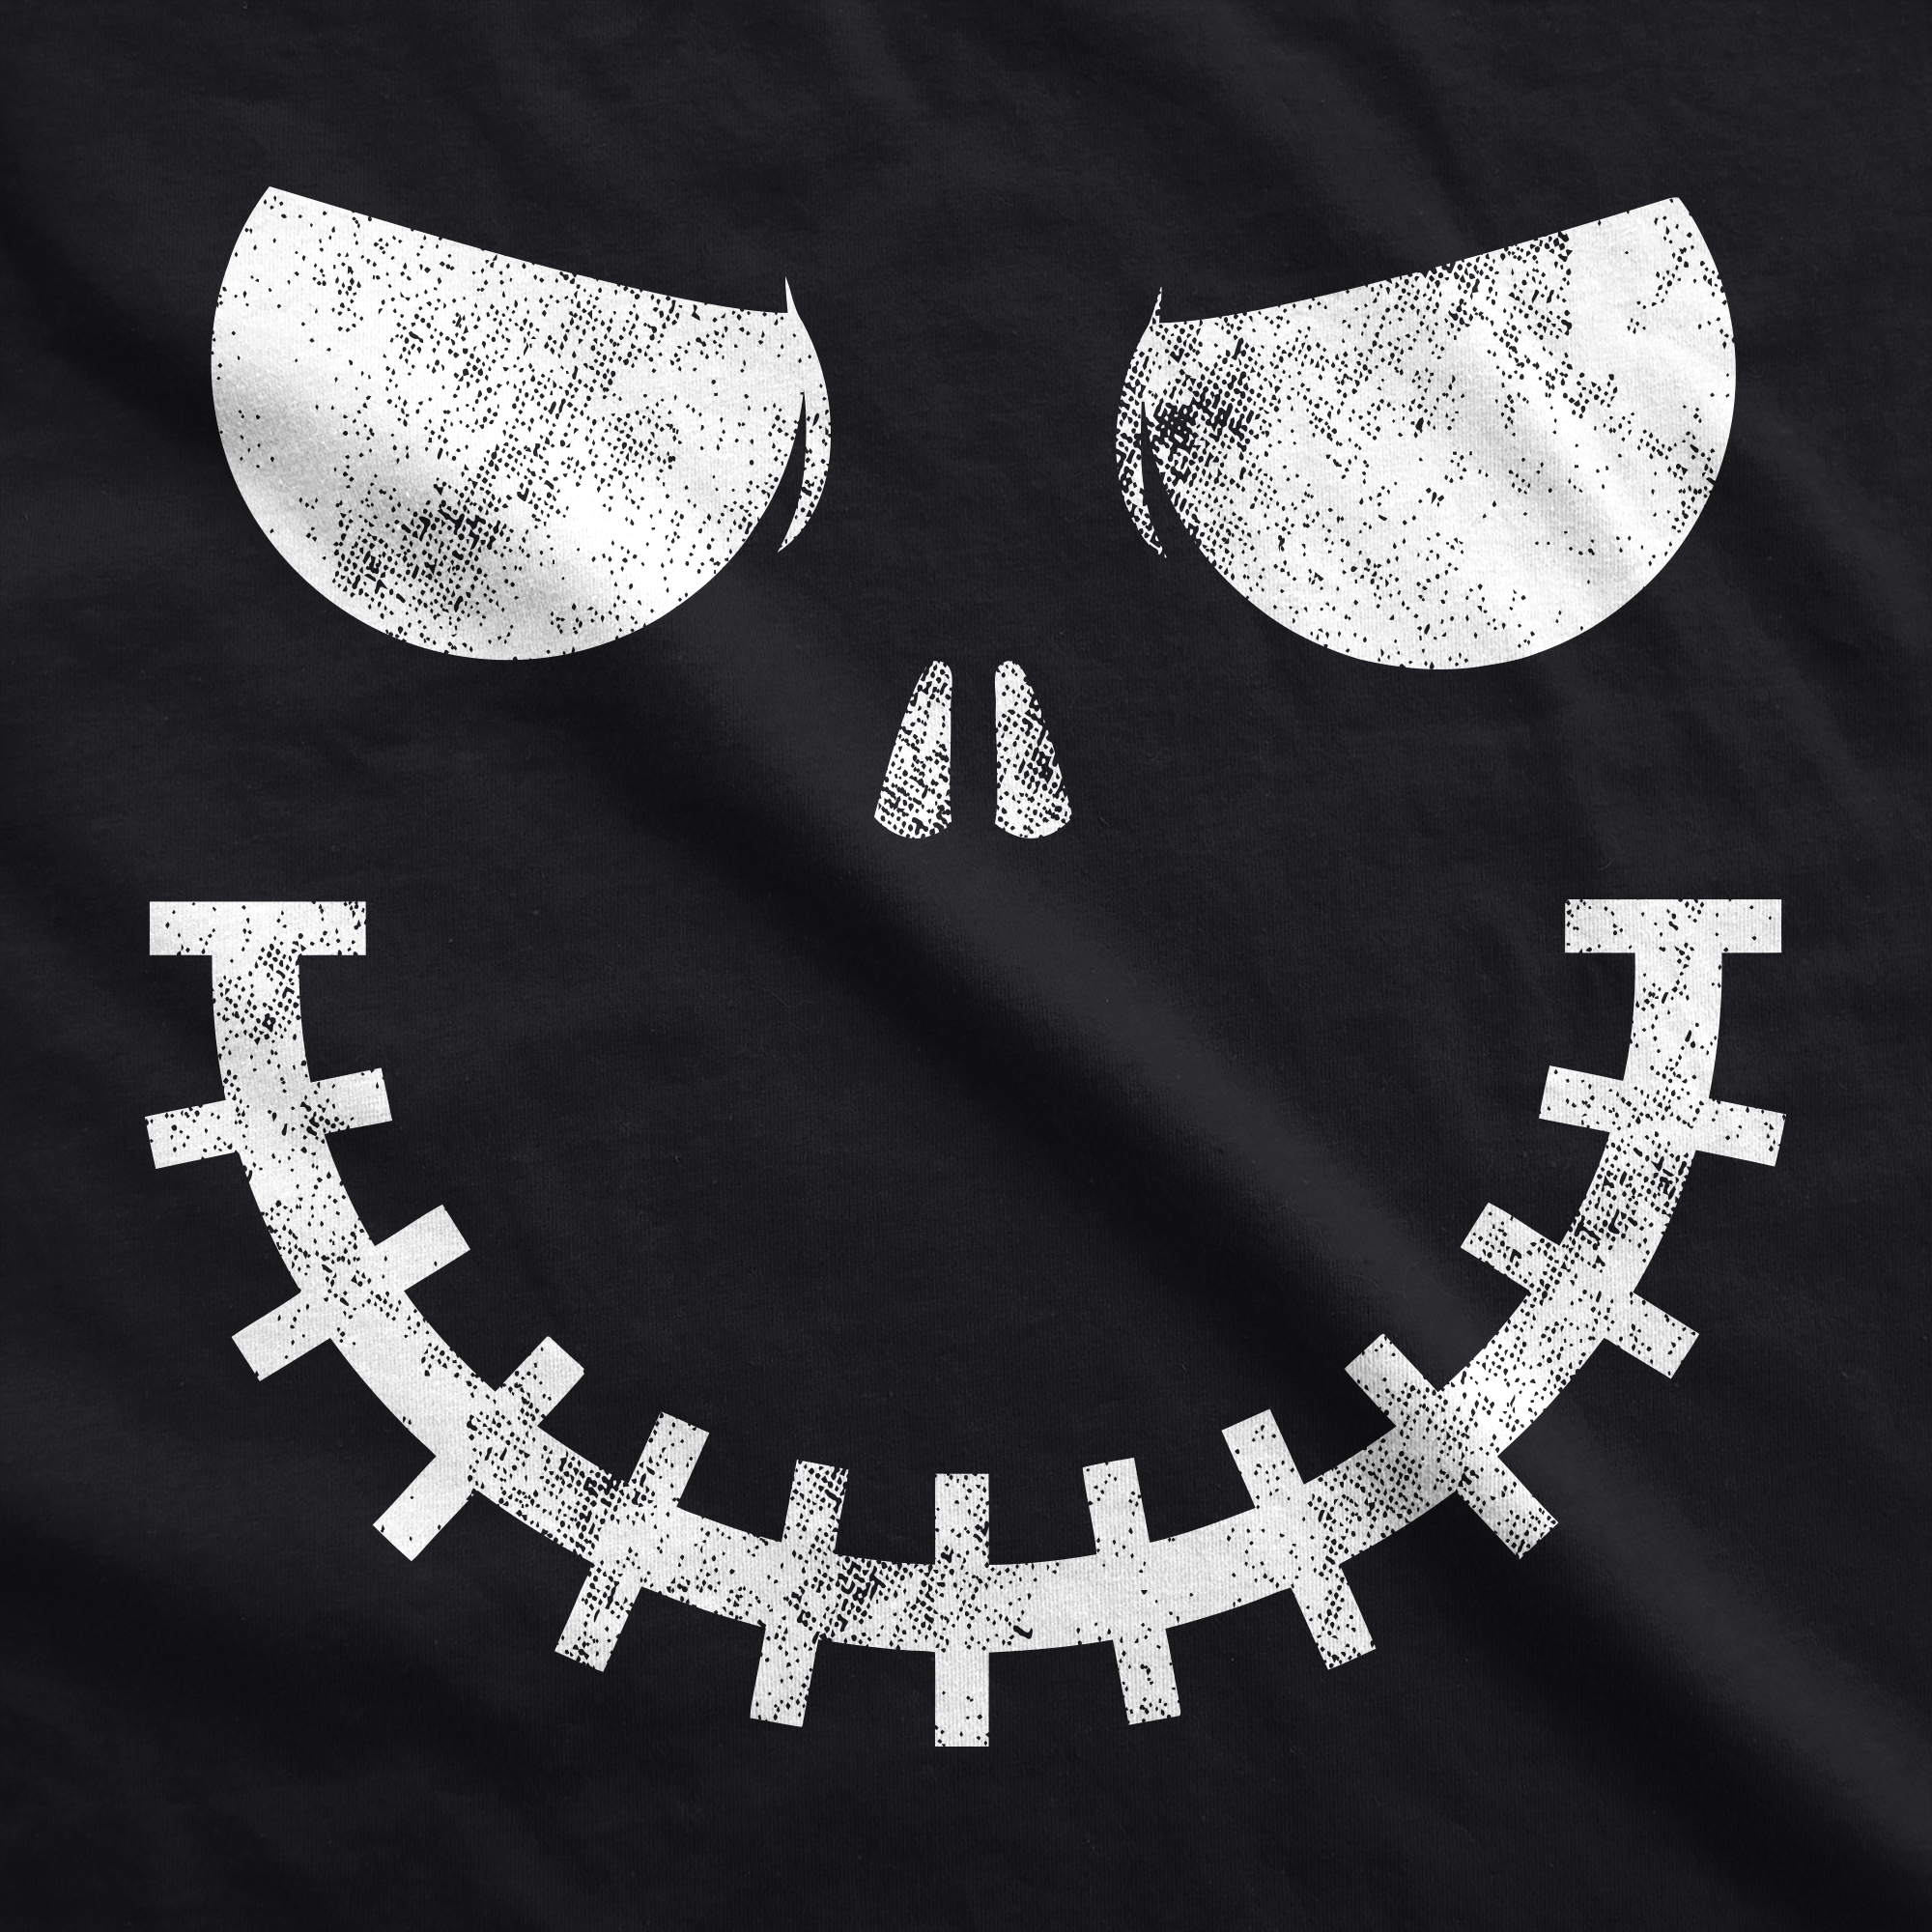 Skeleton Zipper Face Mask Funny Halloween Skull Graphic Novelty Nose And Mouth Covering - image 2 of 6